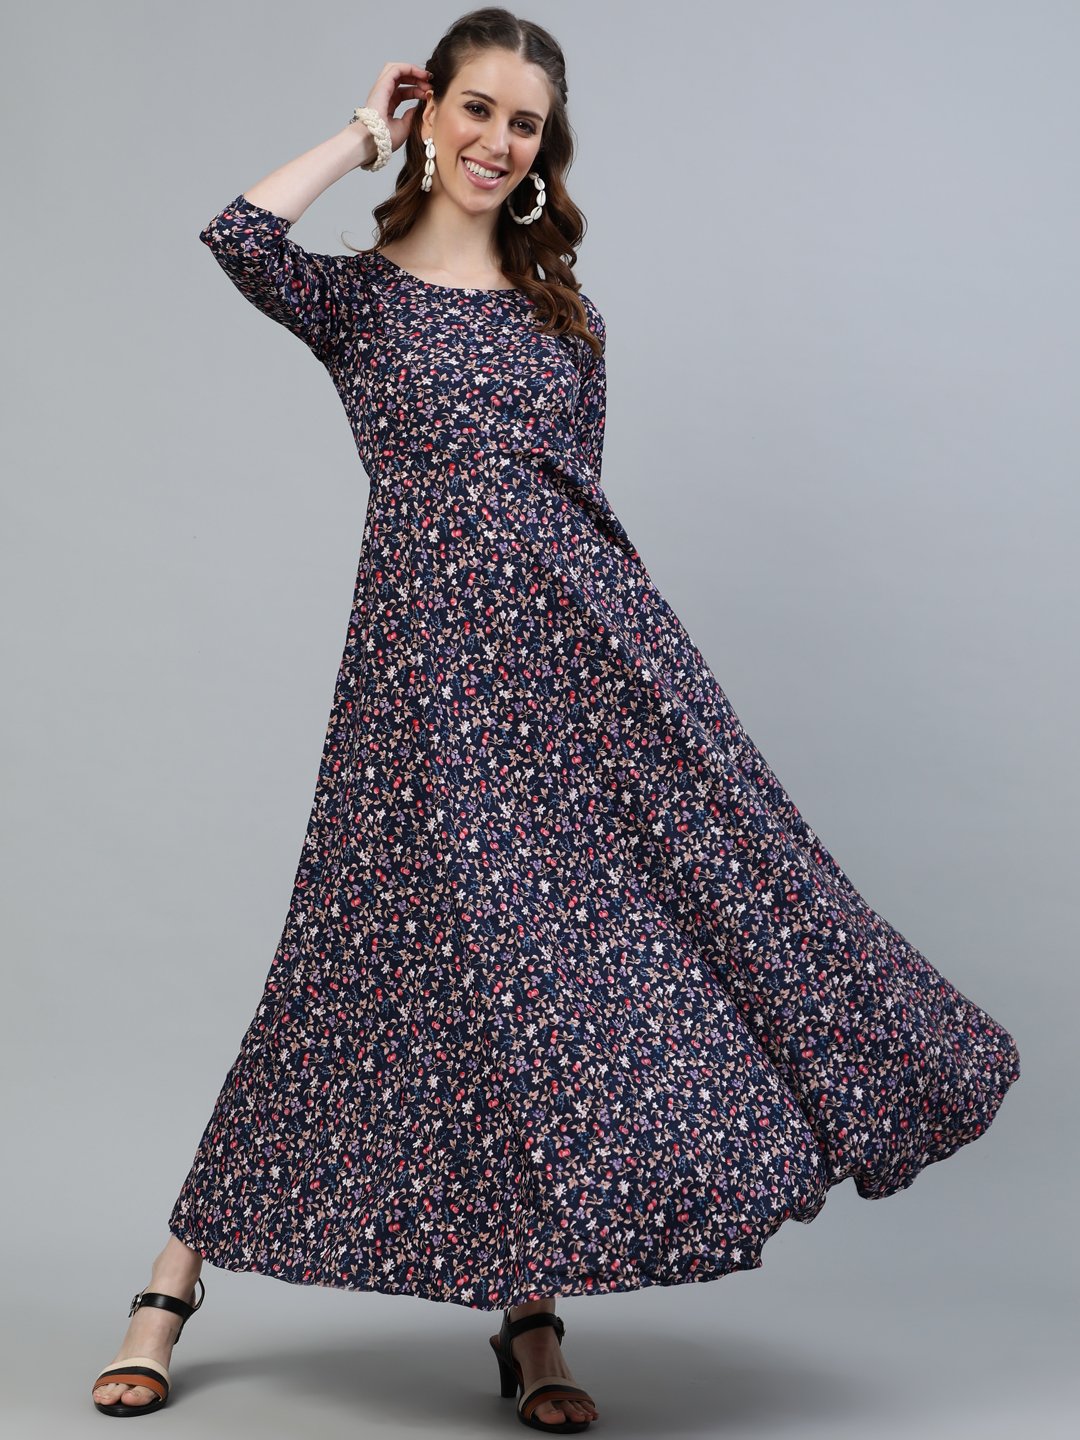 Women's Blue Floral Printed Maxi Dress With Three Quarter Sleeves - Nayo Clothing